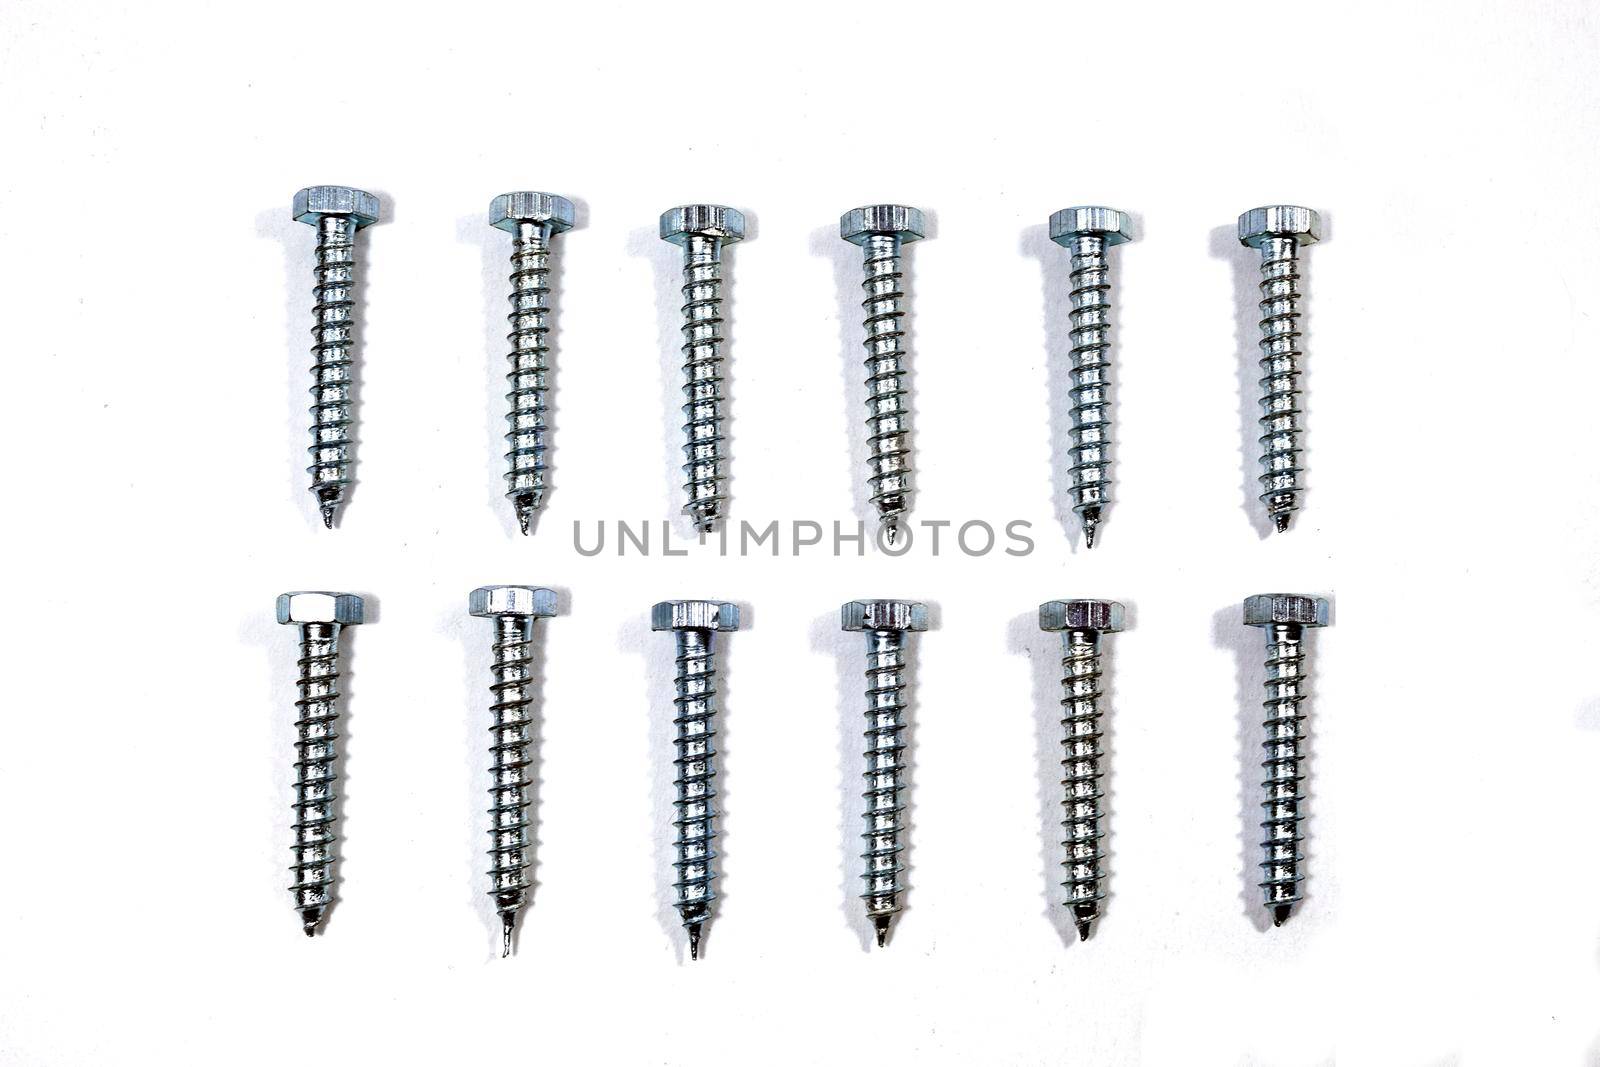 A set of new screws on a white background by bybyphotography